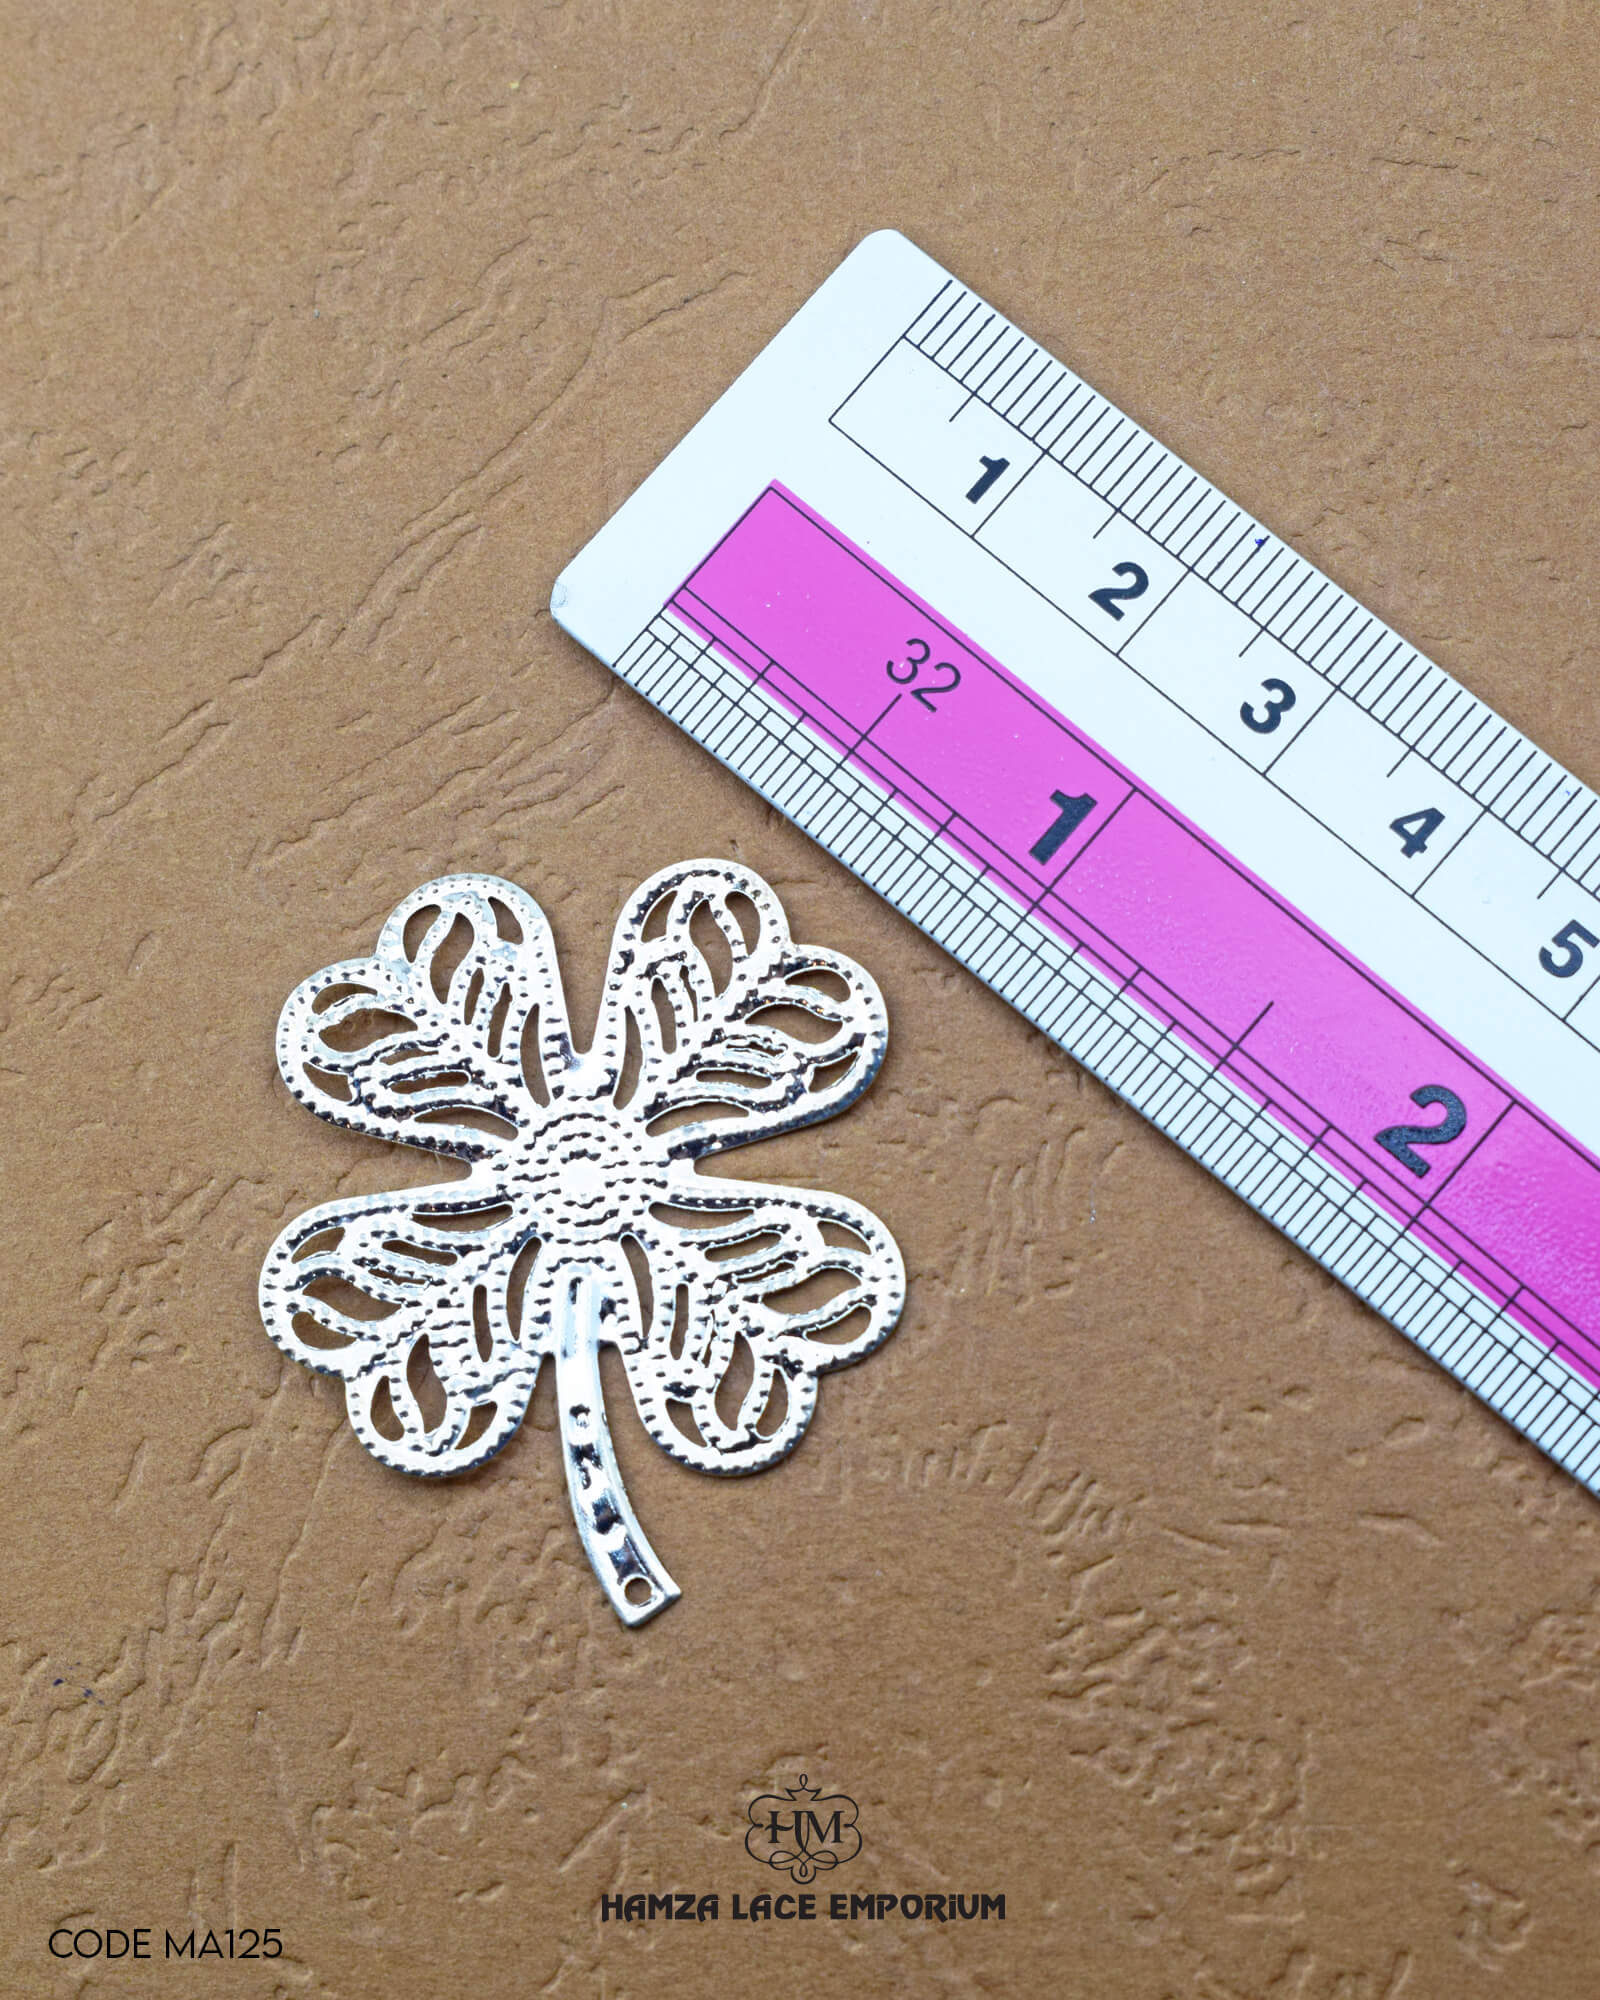 Elegant 'Flower Design Metal Accessory MA125' for Clothing (Size shown with ruler)